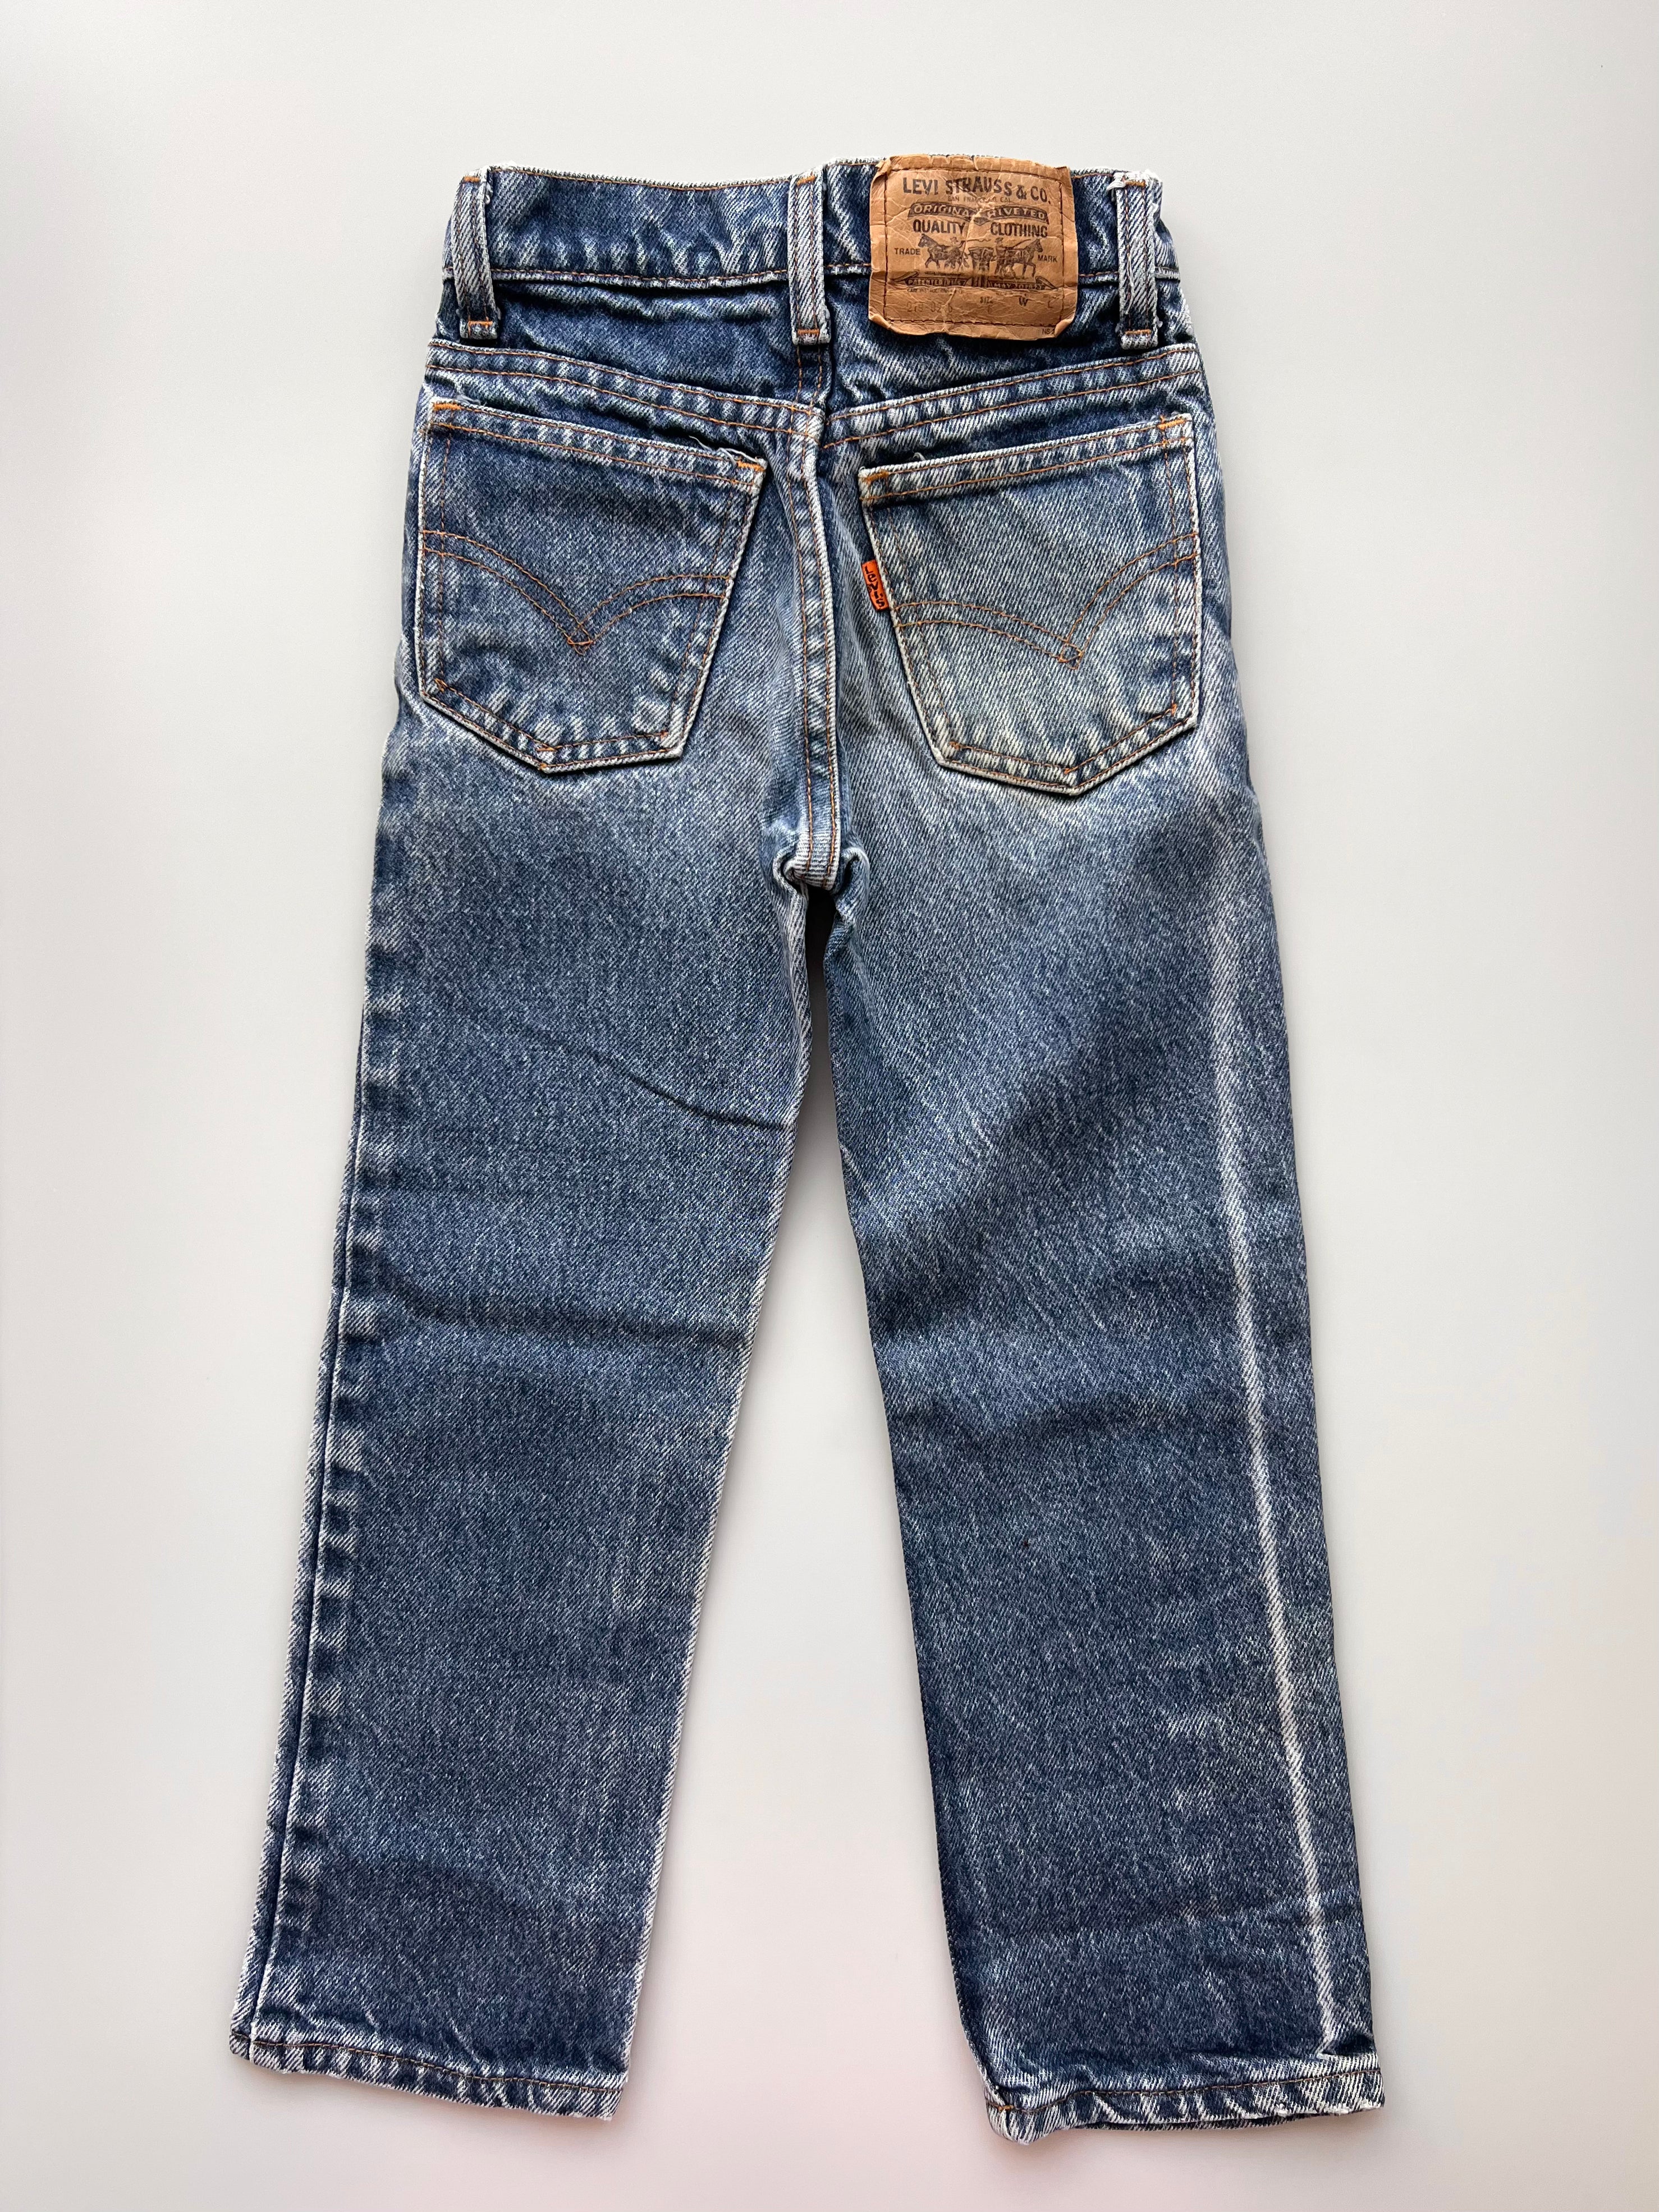 Levi's Perfect Vintage USA Made Stone Wash 501's Age 5-6